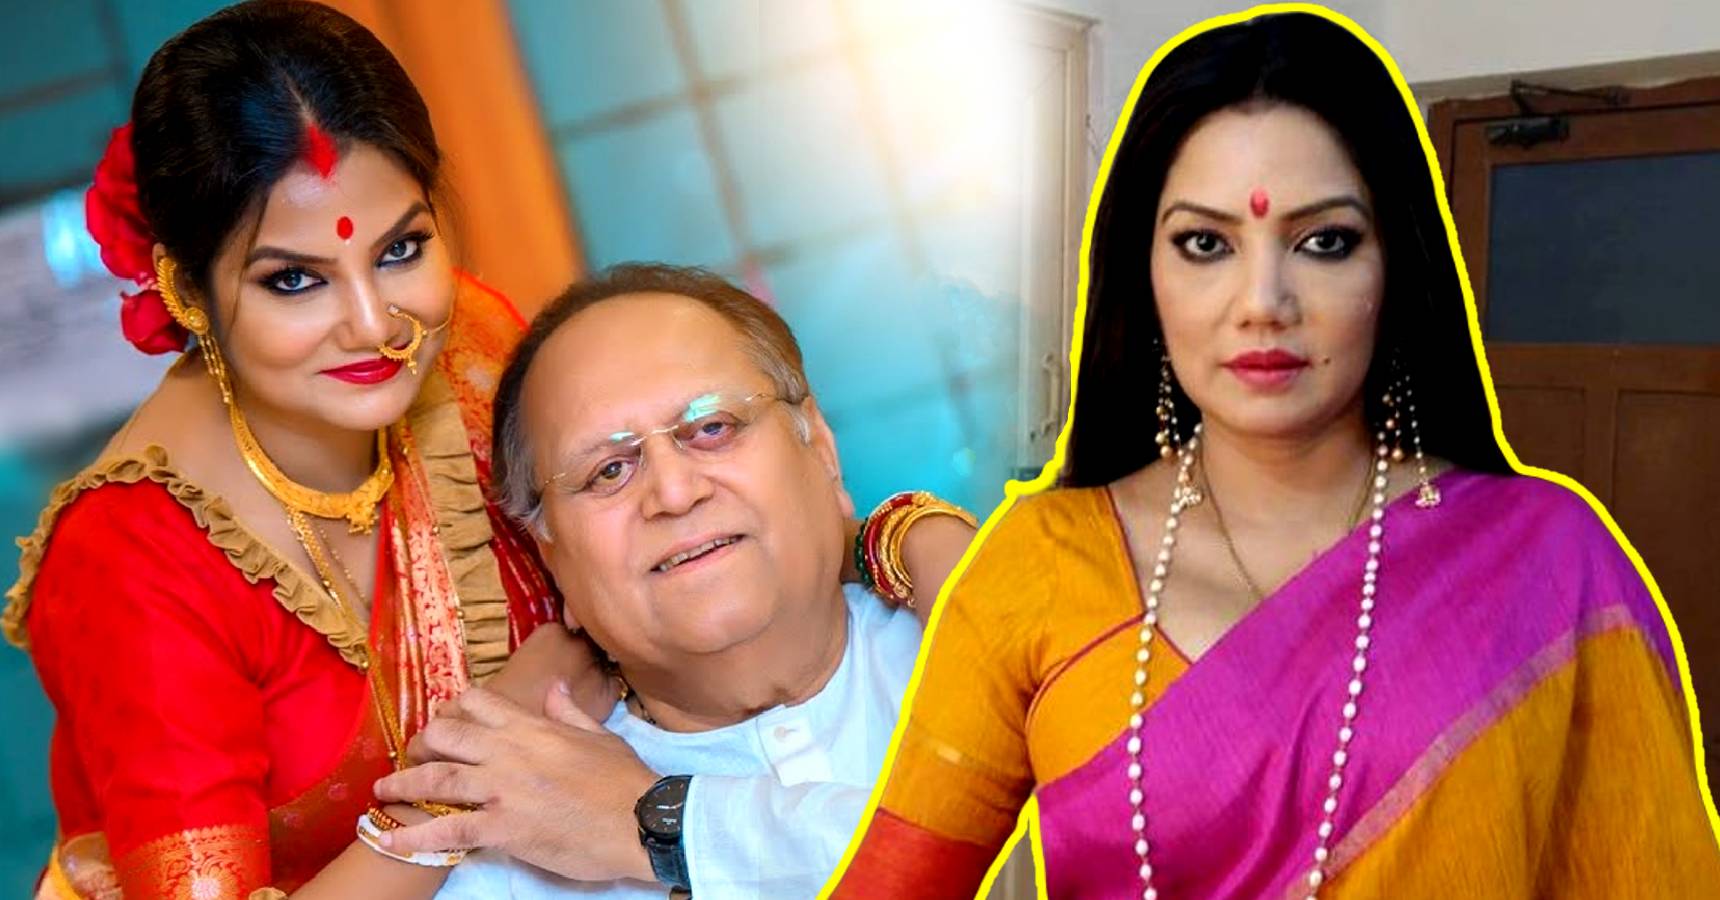 Dolon Roy opens up about her husband Dipankar Roy’s first wife and daughters